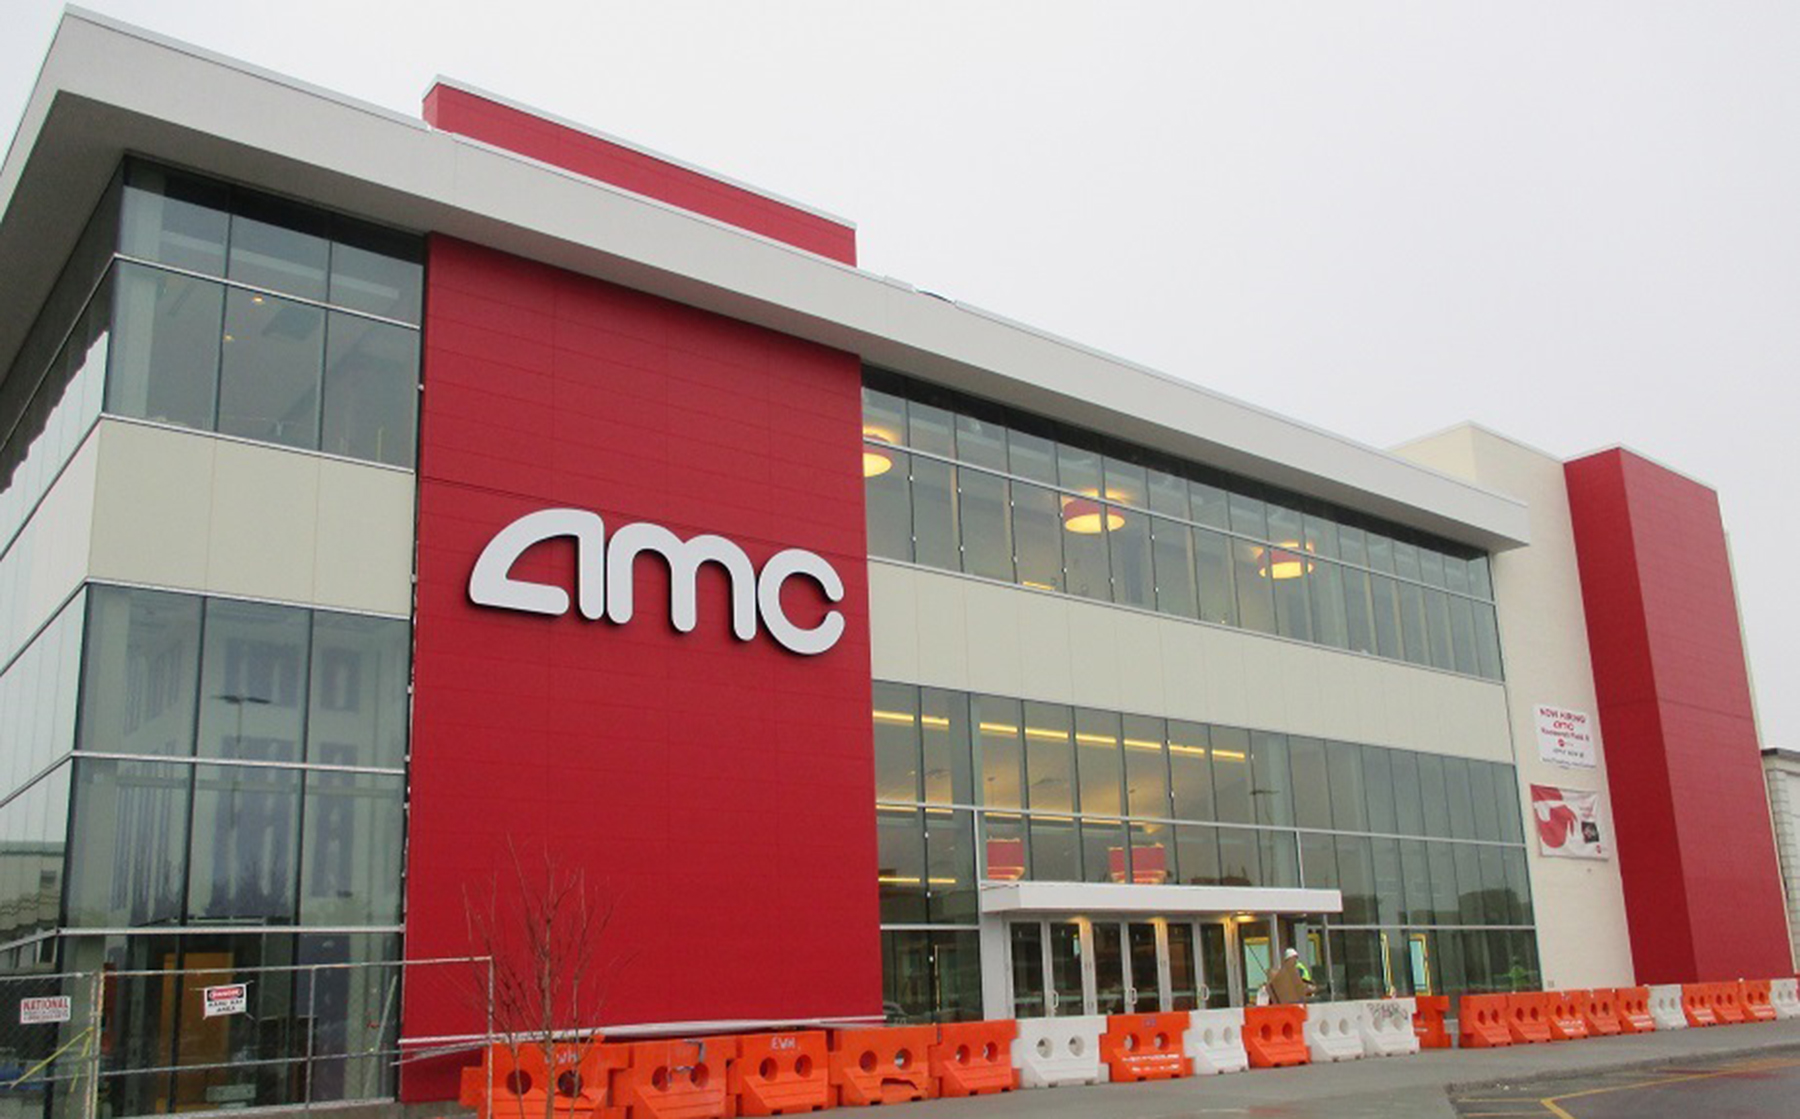 E W Howell Completes Renovation Of 43 756 S F Amc Movie Theater